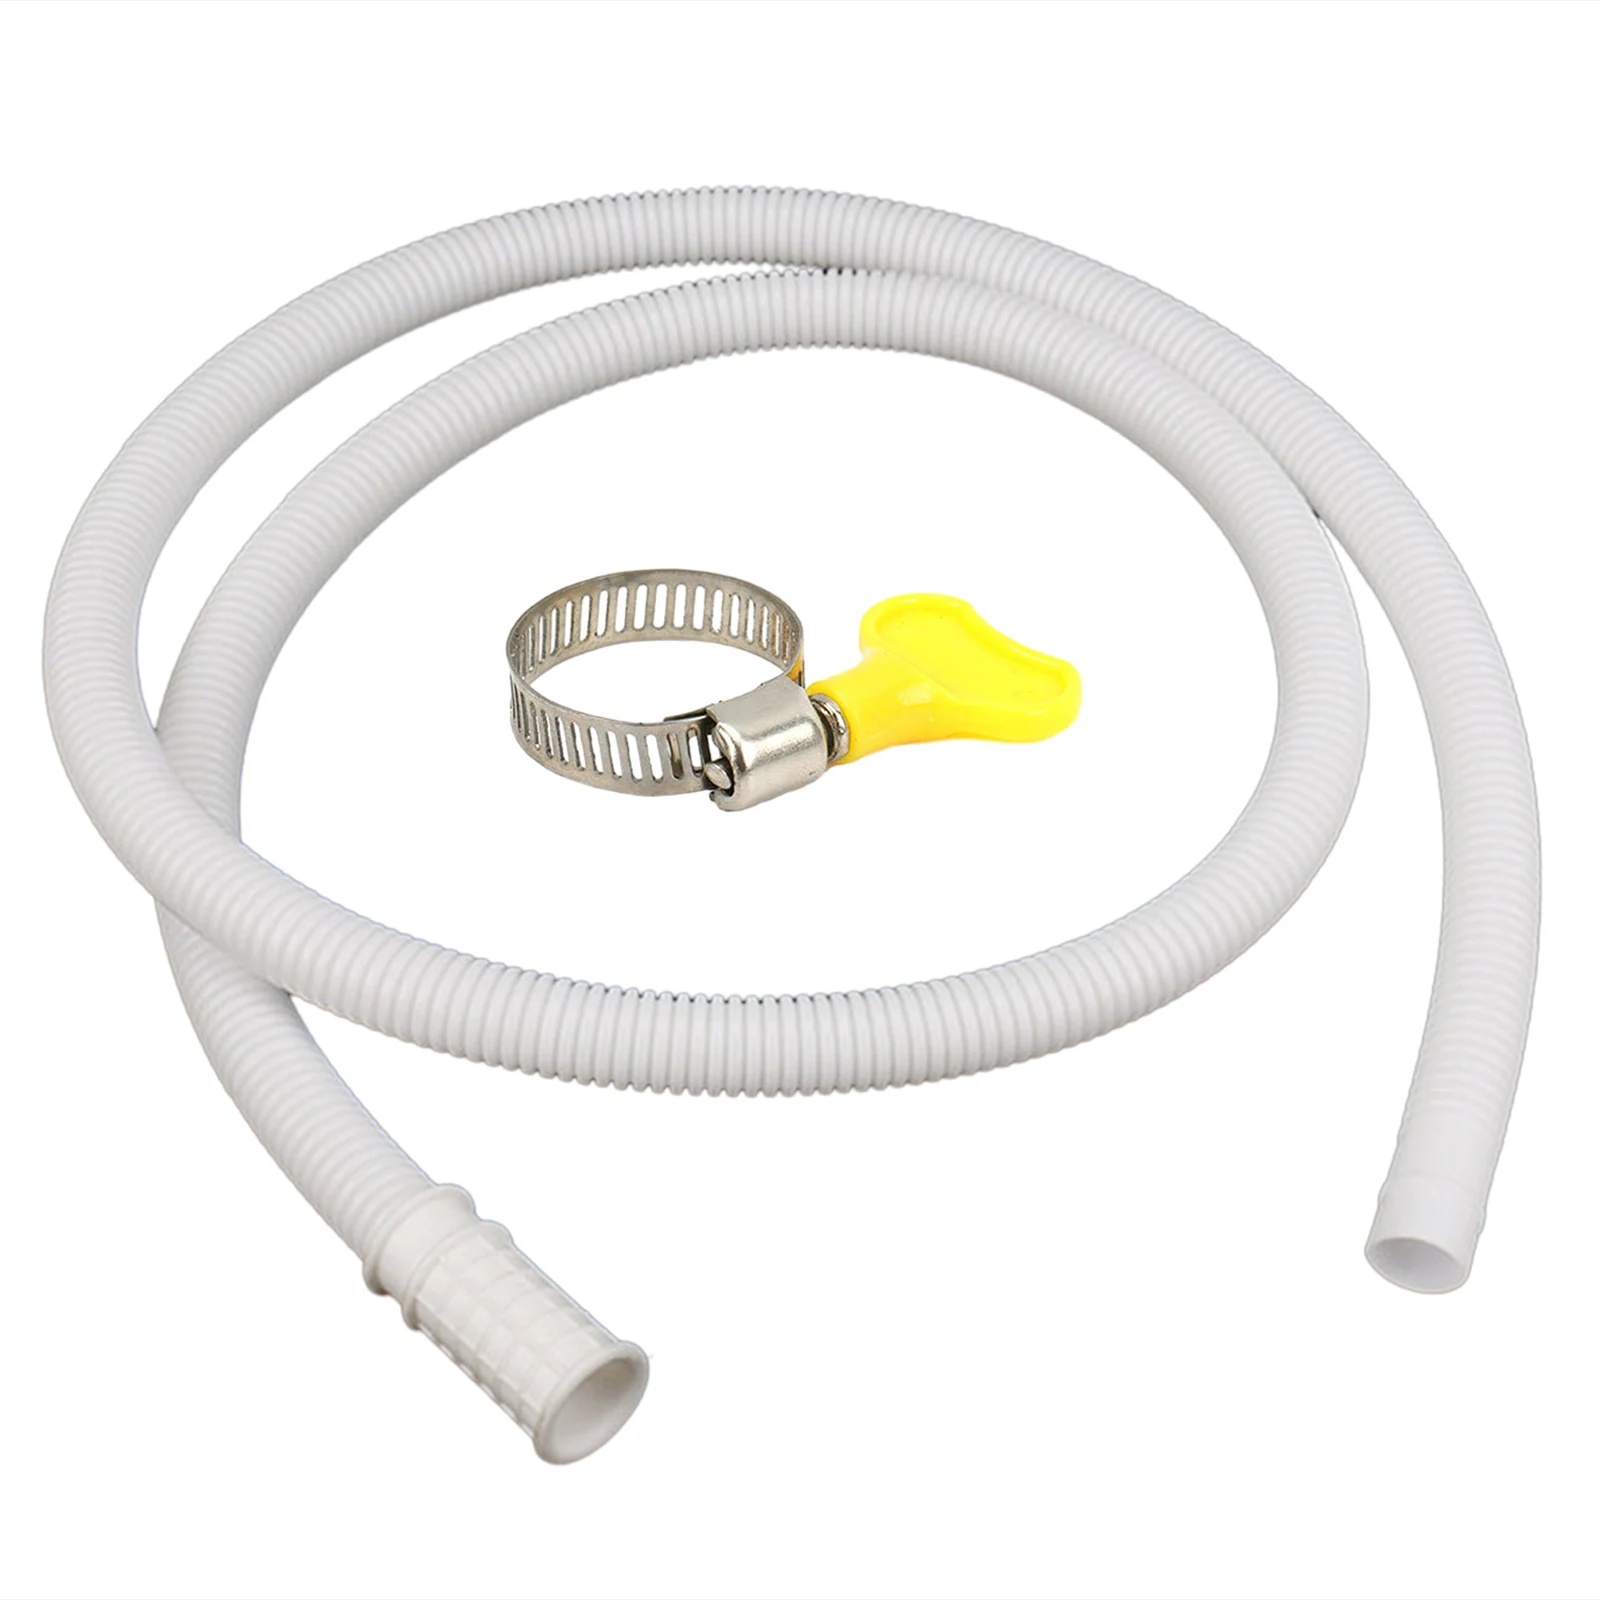 Universal Plastic Flexible Hose Washing Machine Air Conditioner Drain Hose Portable Hose With Clamp For Various Scenarios